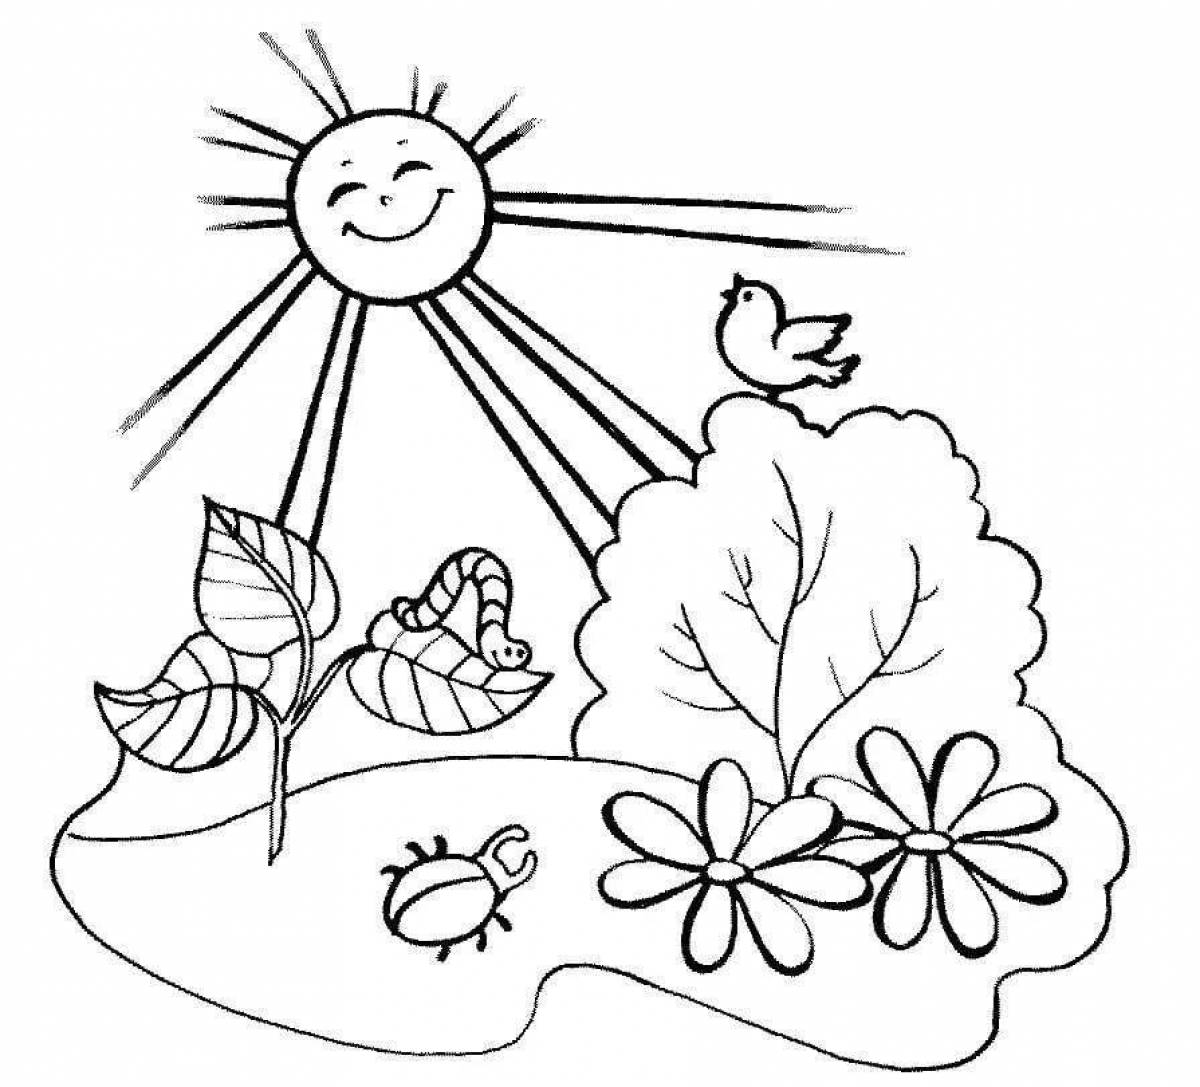 Bright summer coloring page